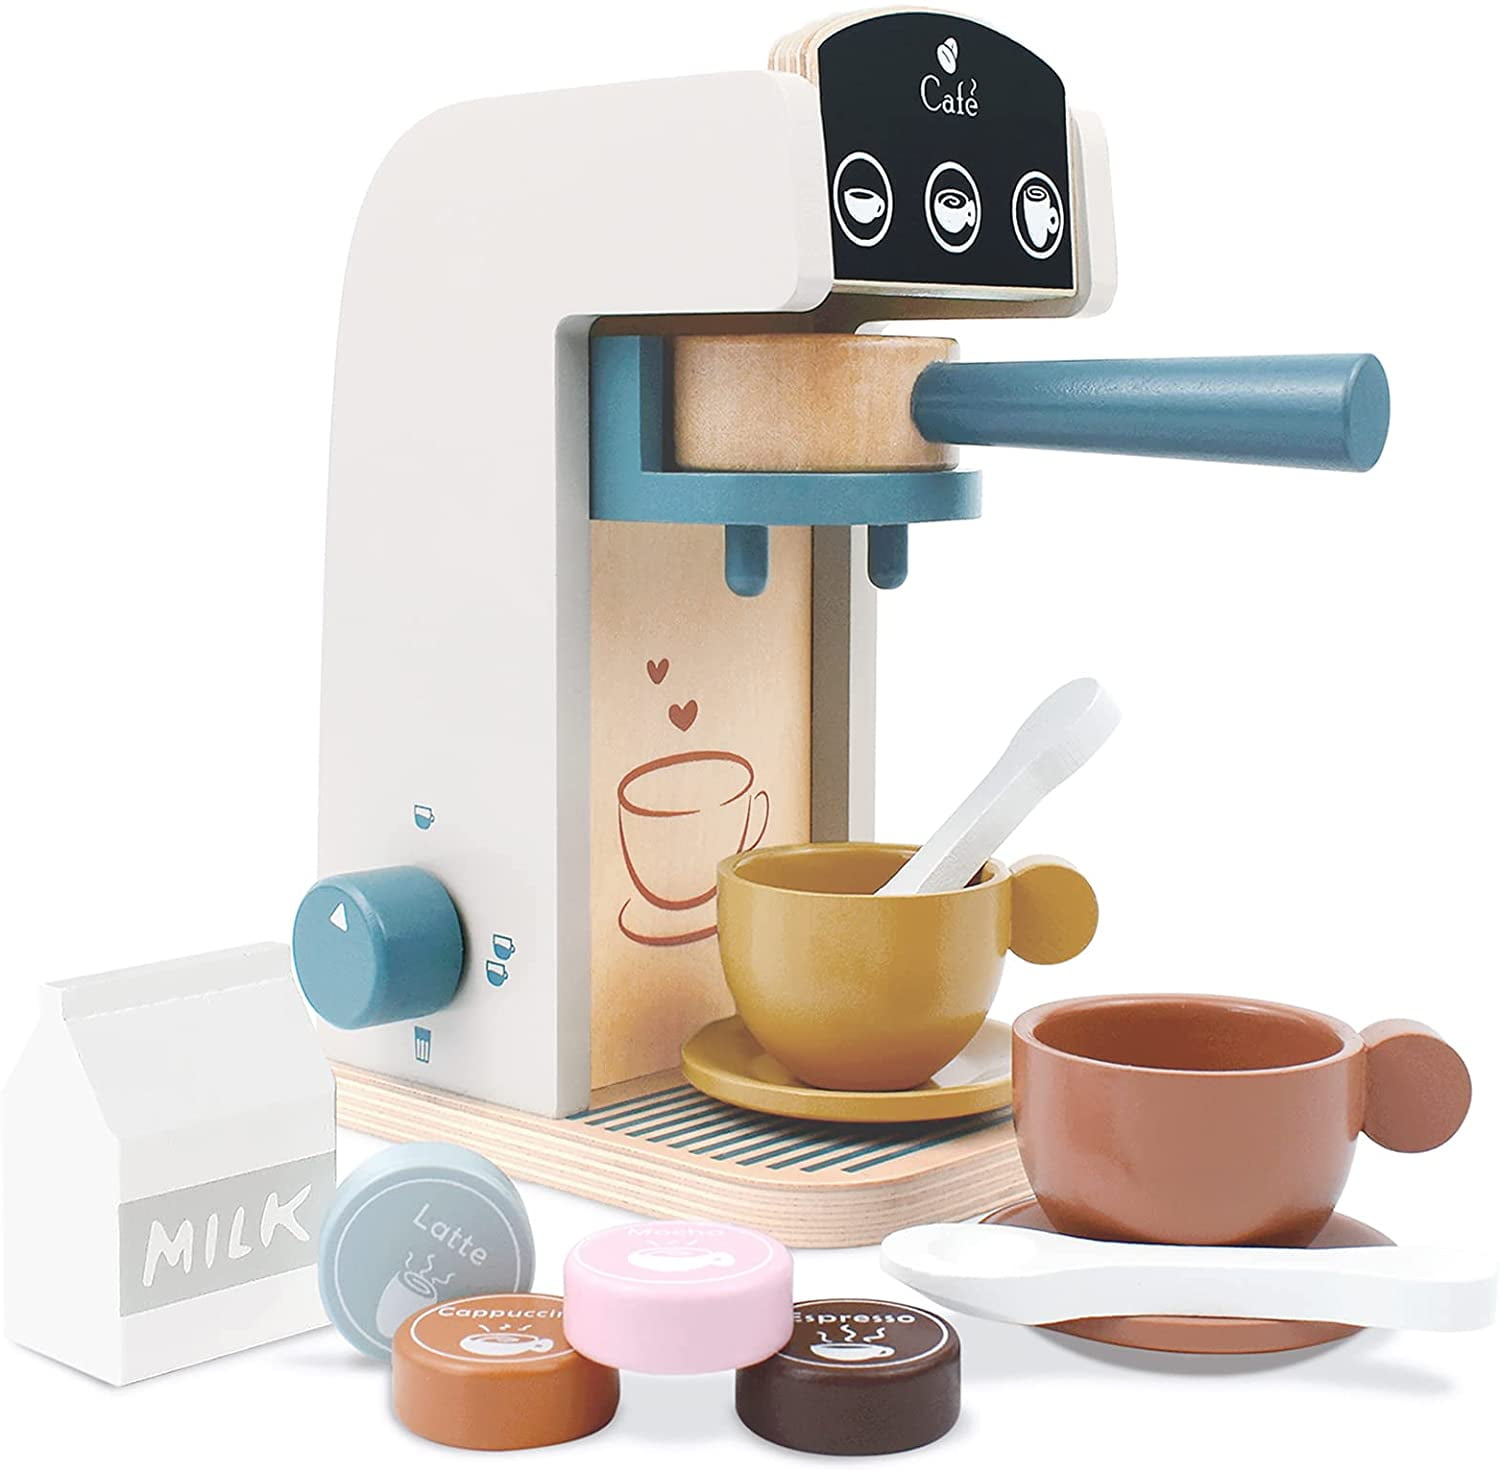 KidKraft Children's Espresso Coffee Set - Role Play Toys for The Kitchen,  Play Kitchen Accessories, Gift for Ages 3+